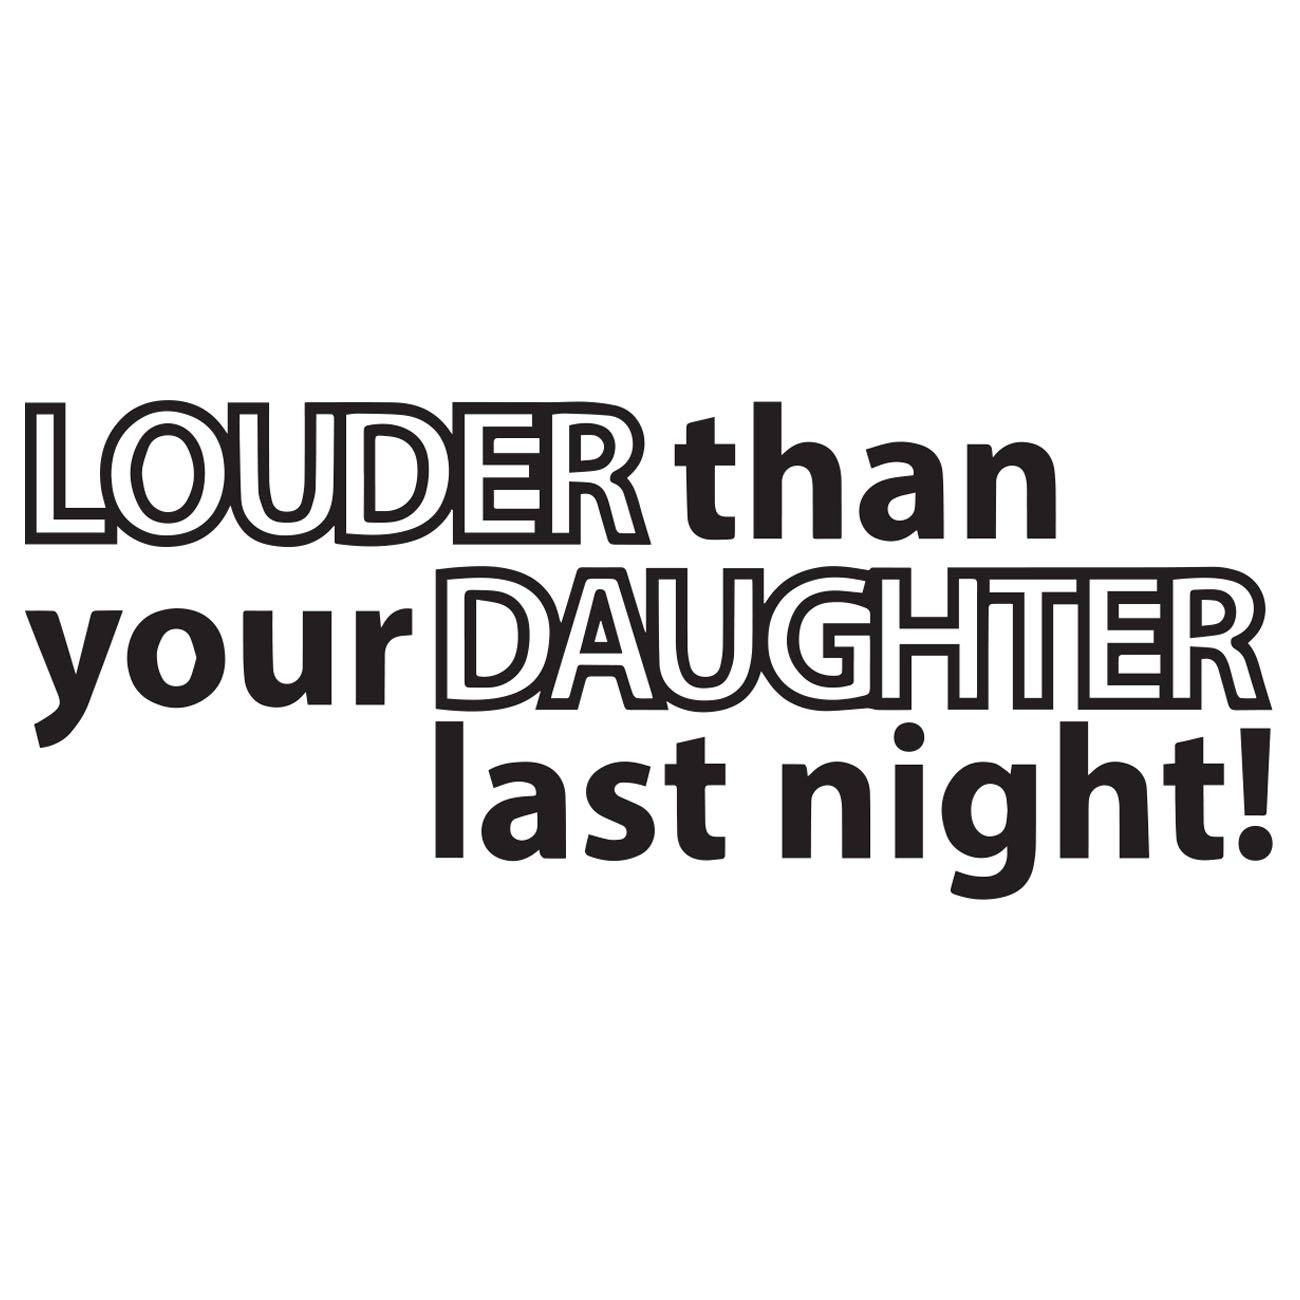 Louder the your daughter last night